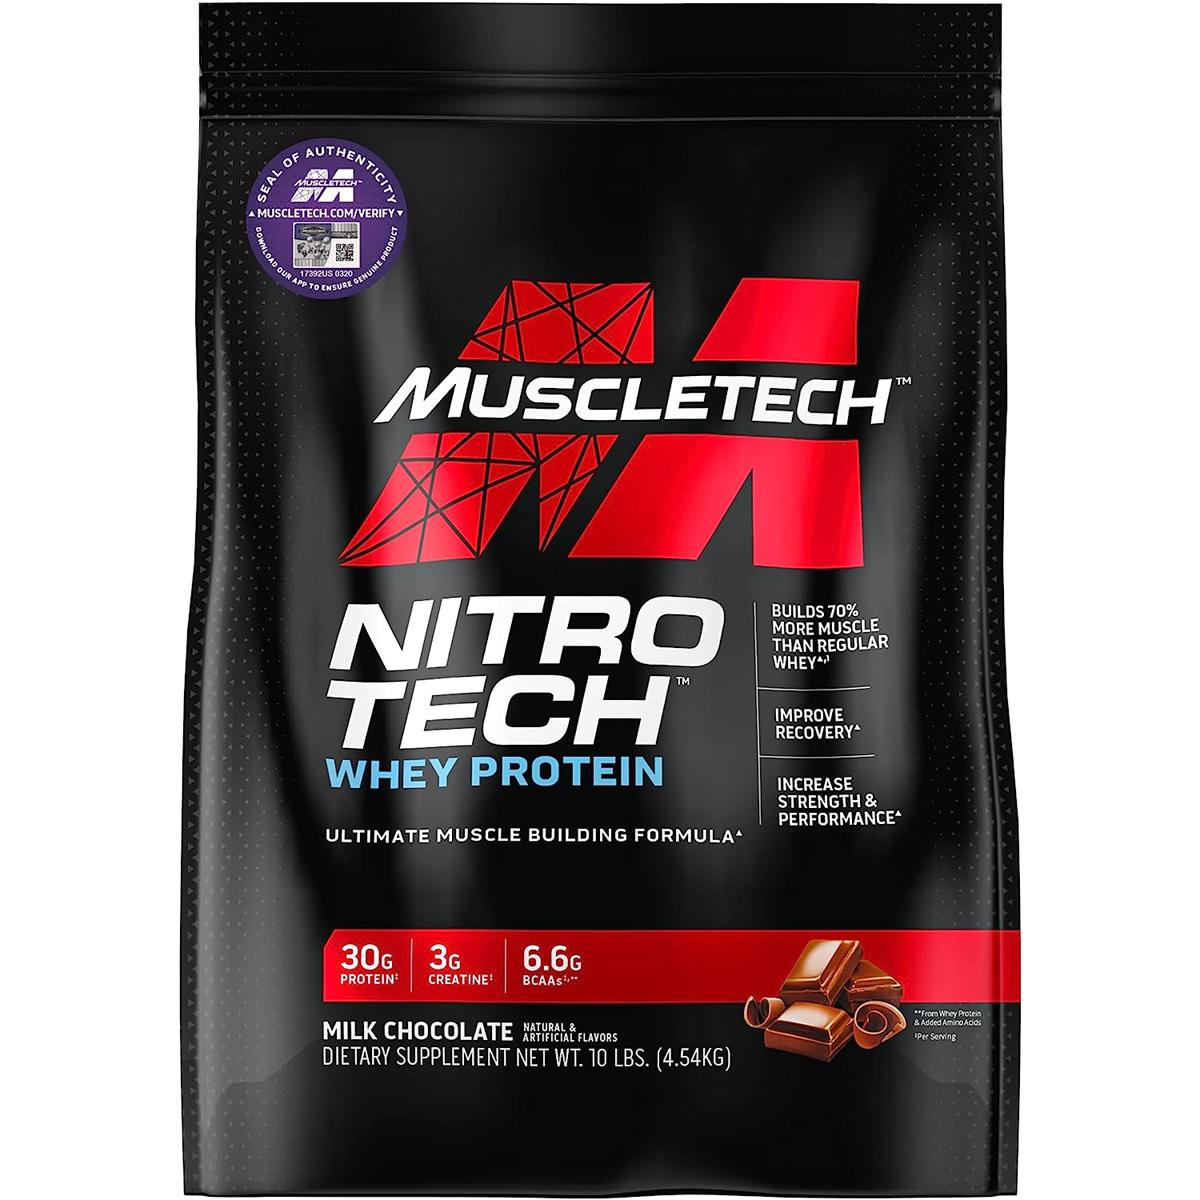 Whey Protein Powder MuscleTech Nitro-Tech Whey Protein 10Lbs for $77.63 Shipped